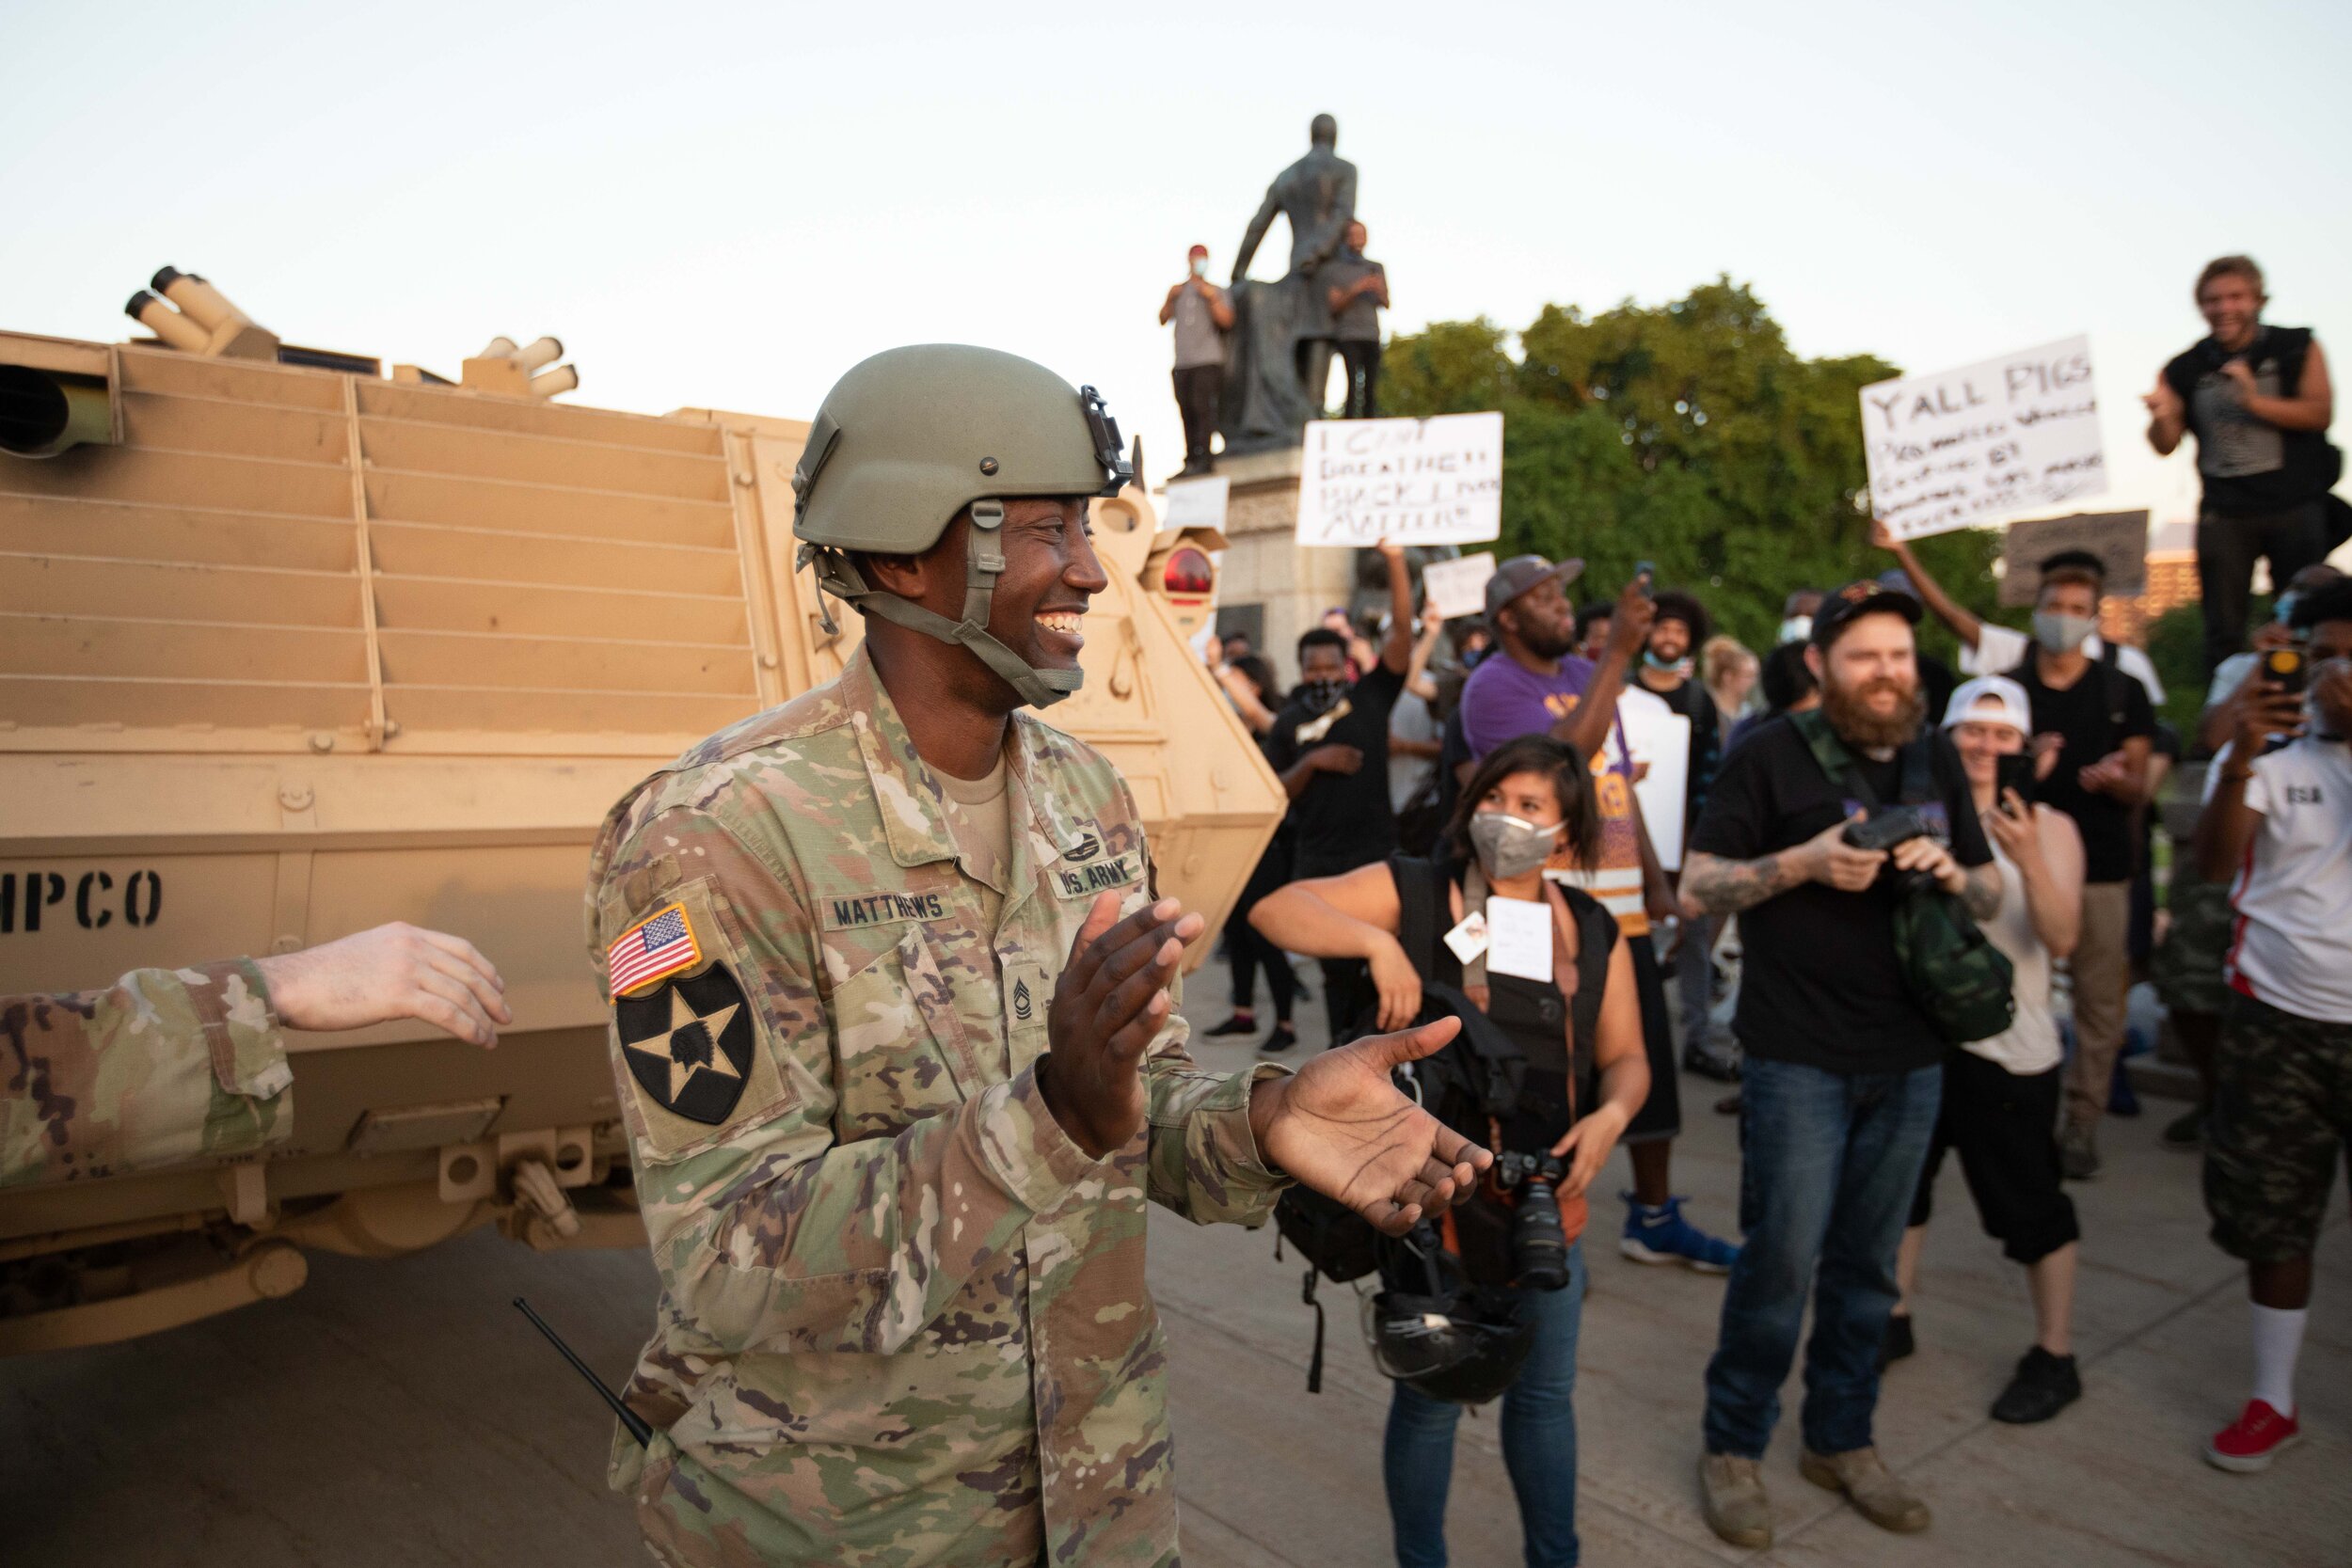  Master Sgt. Acie Matthews Jr., the Minnesota National Guard State Equal Opportunity Advisor claps as he goes to talk to protesters who were demonstrating over the police killing of George Floyd on the steps of the Minnesota State Capitol in Saint Pa